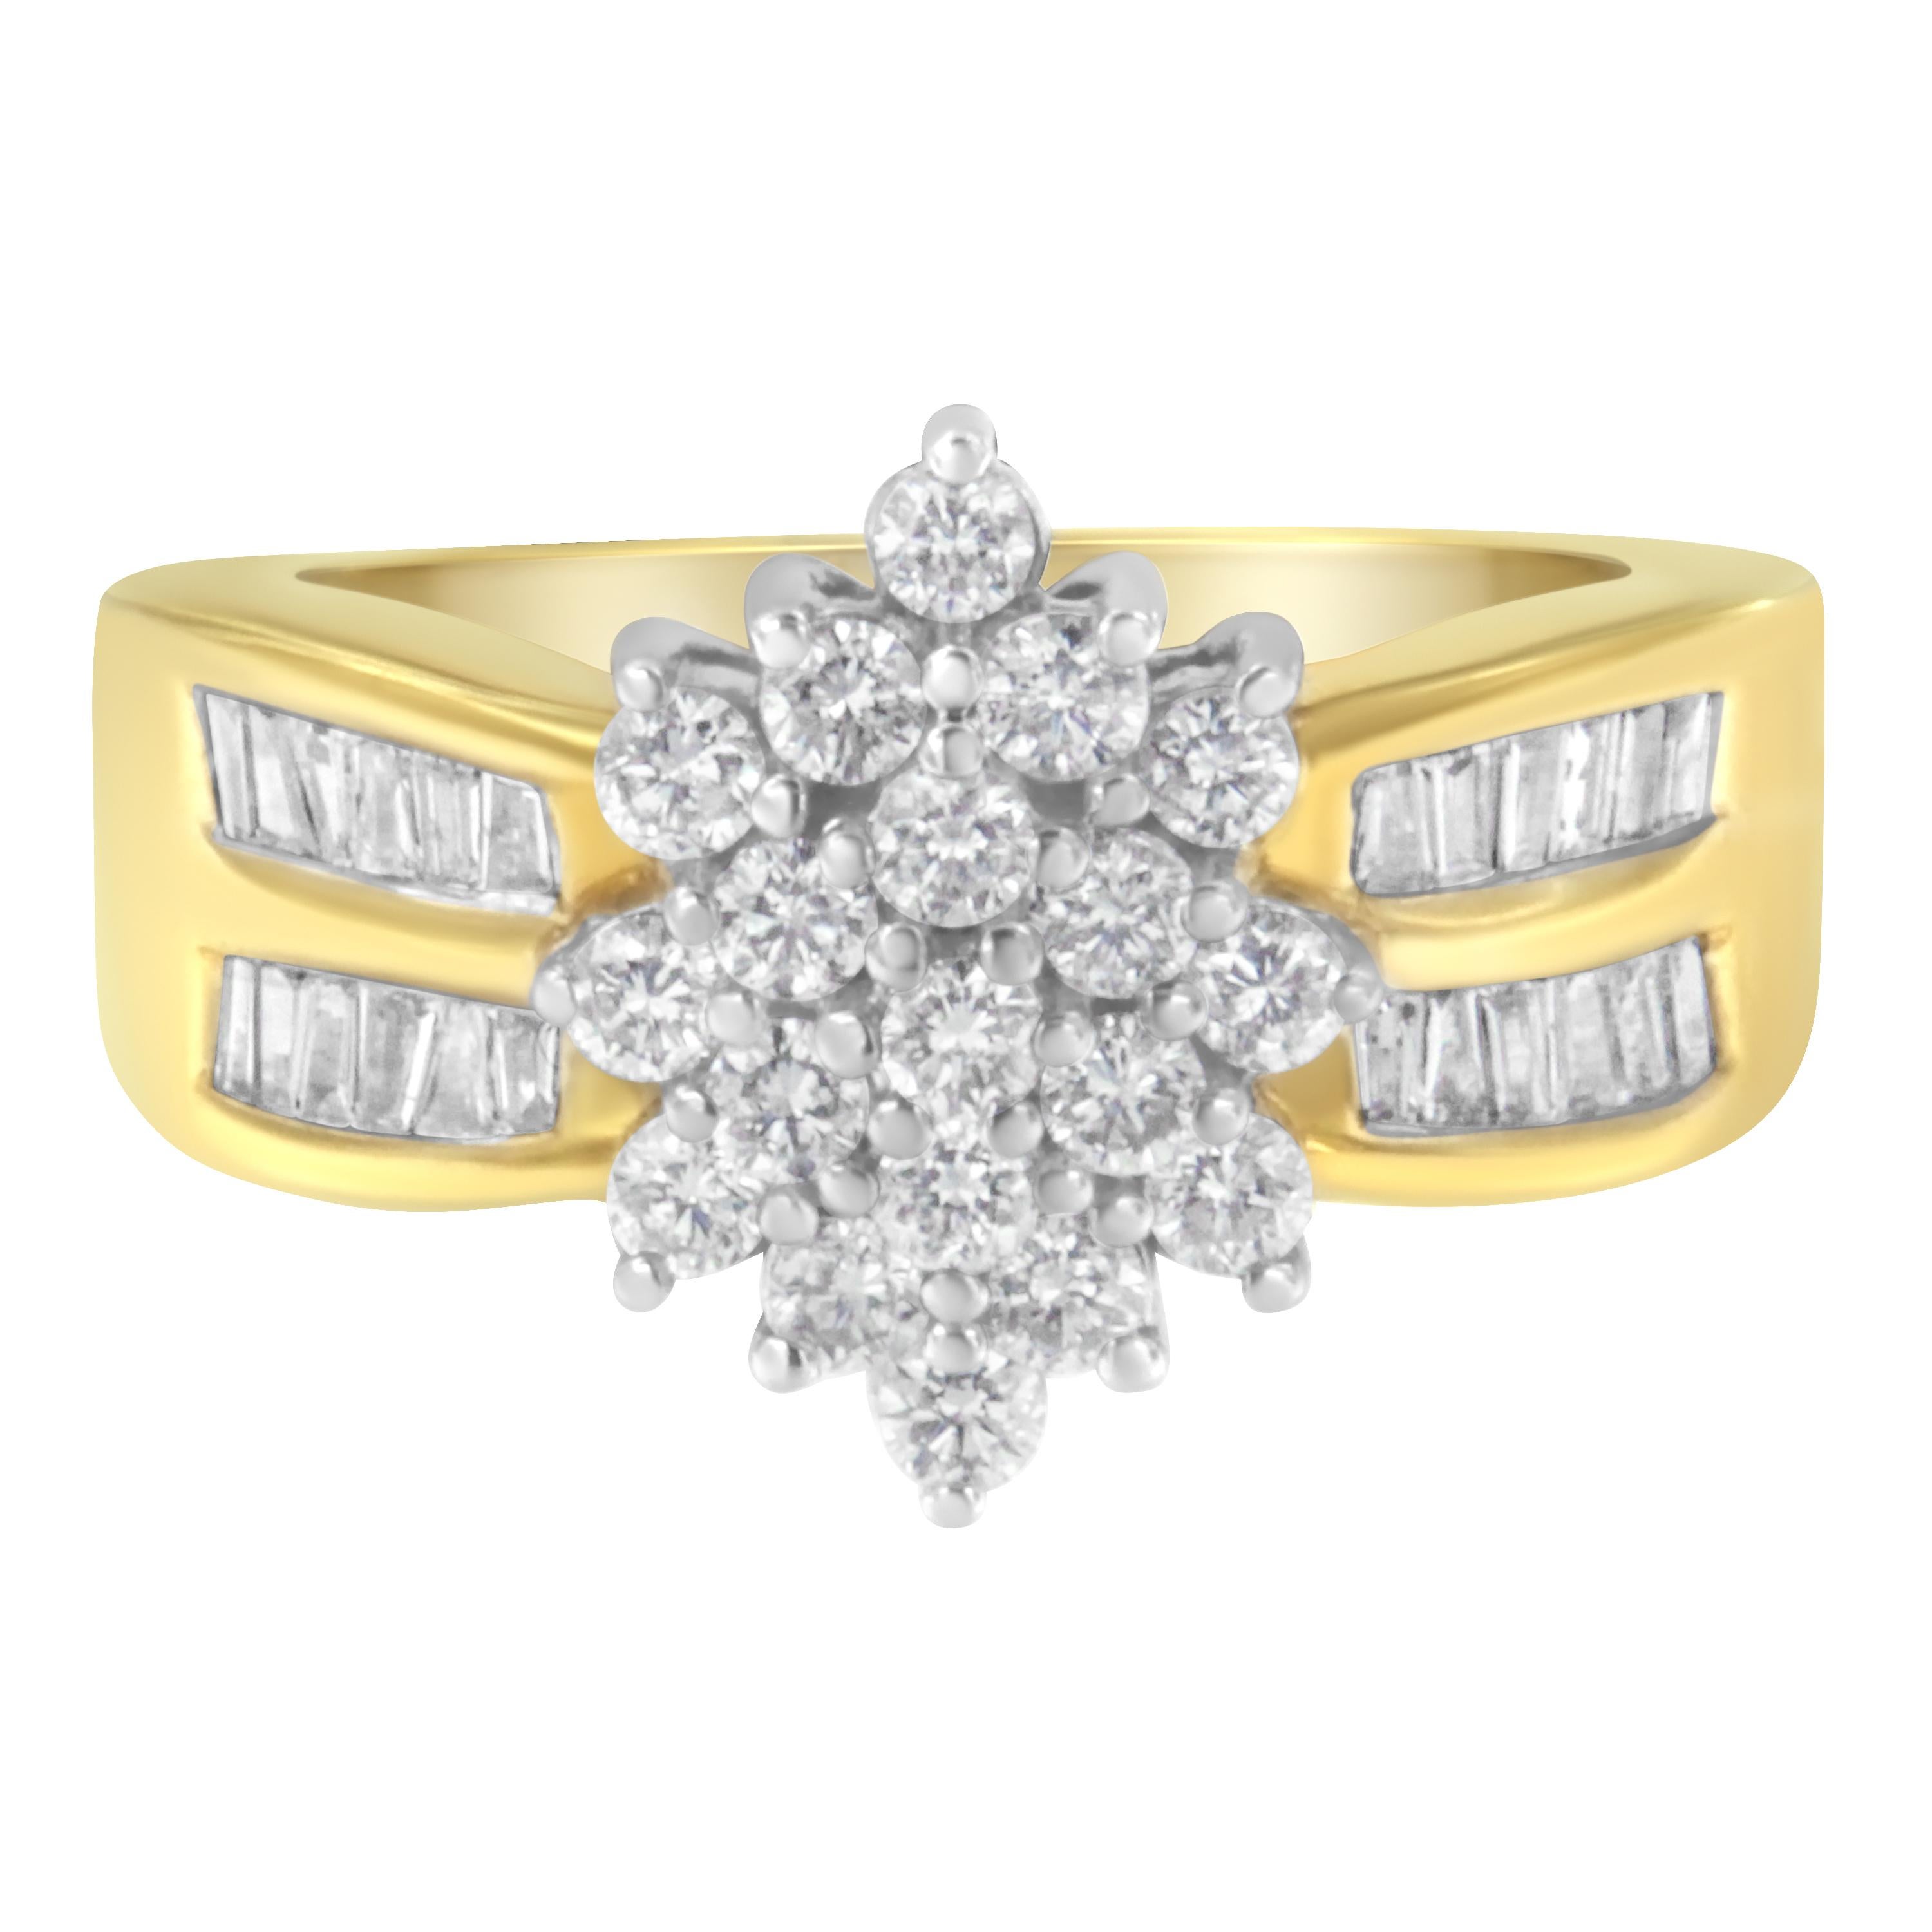 10K Yellow Gold 1.0 Carat Diamond Floral Cluster Double-Channel Flared Band Ring